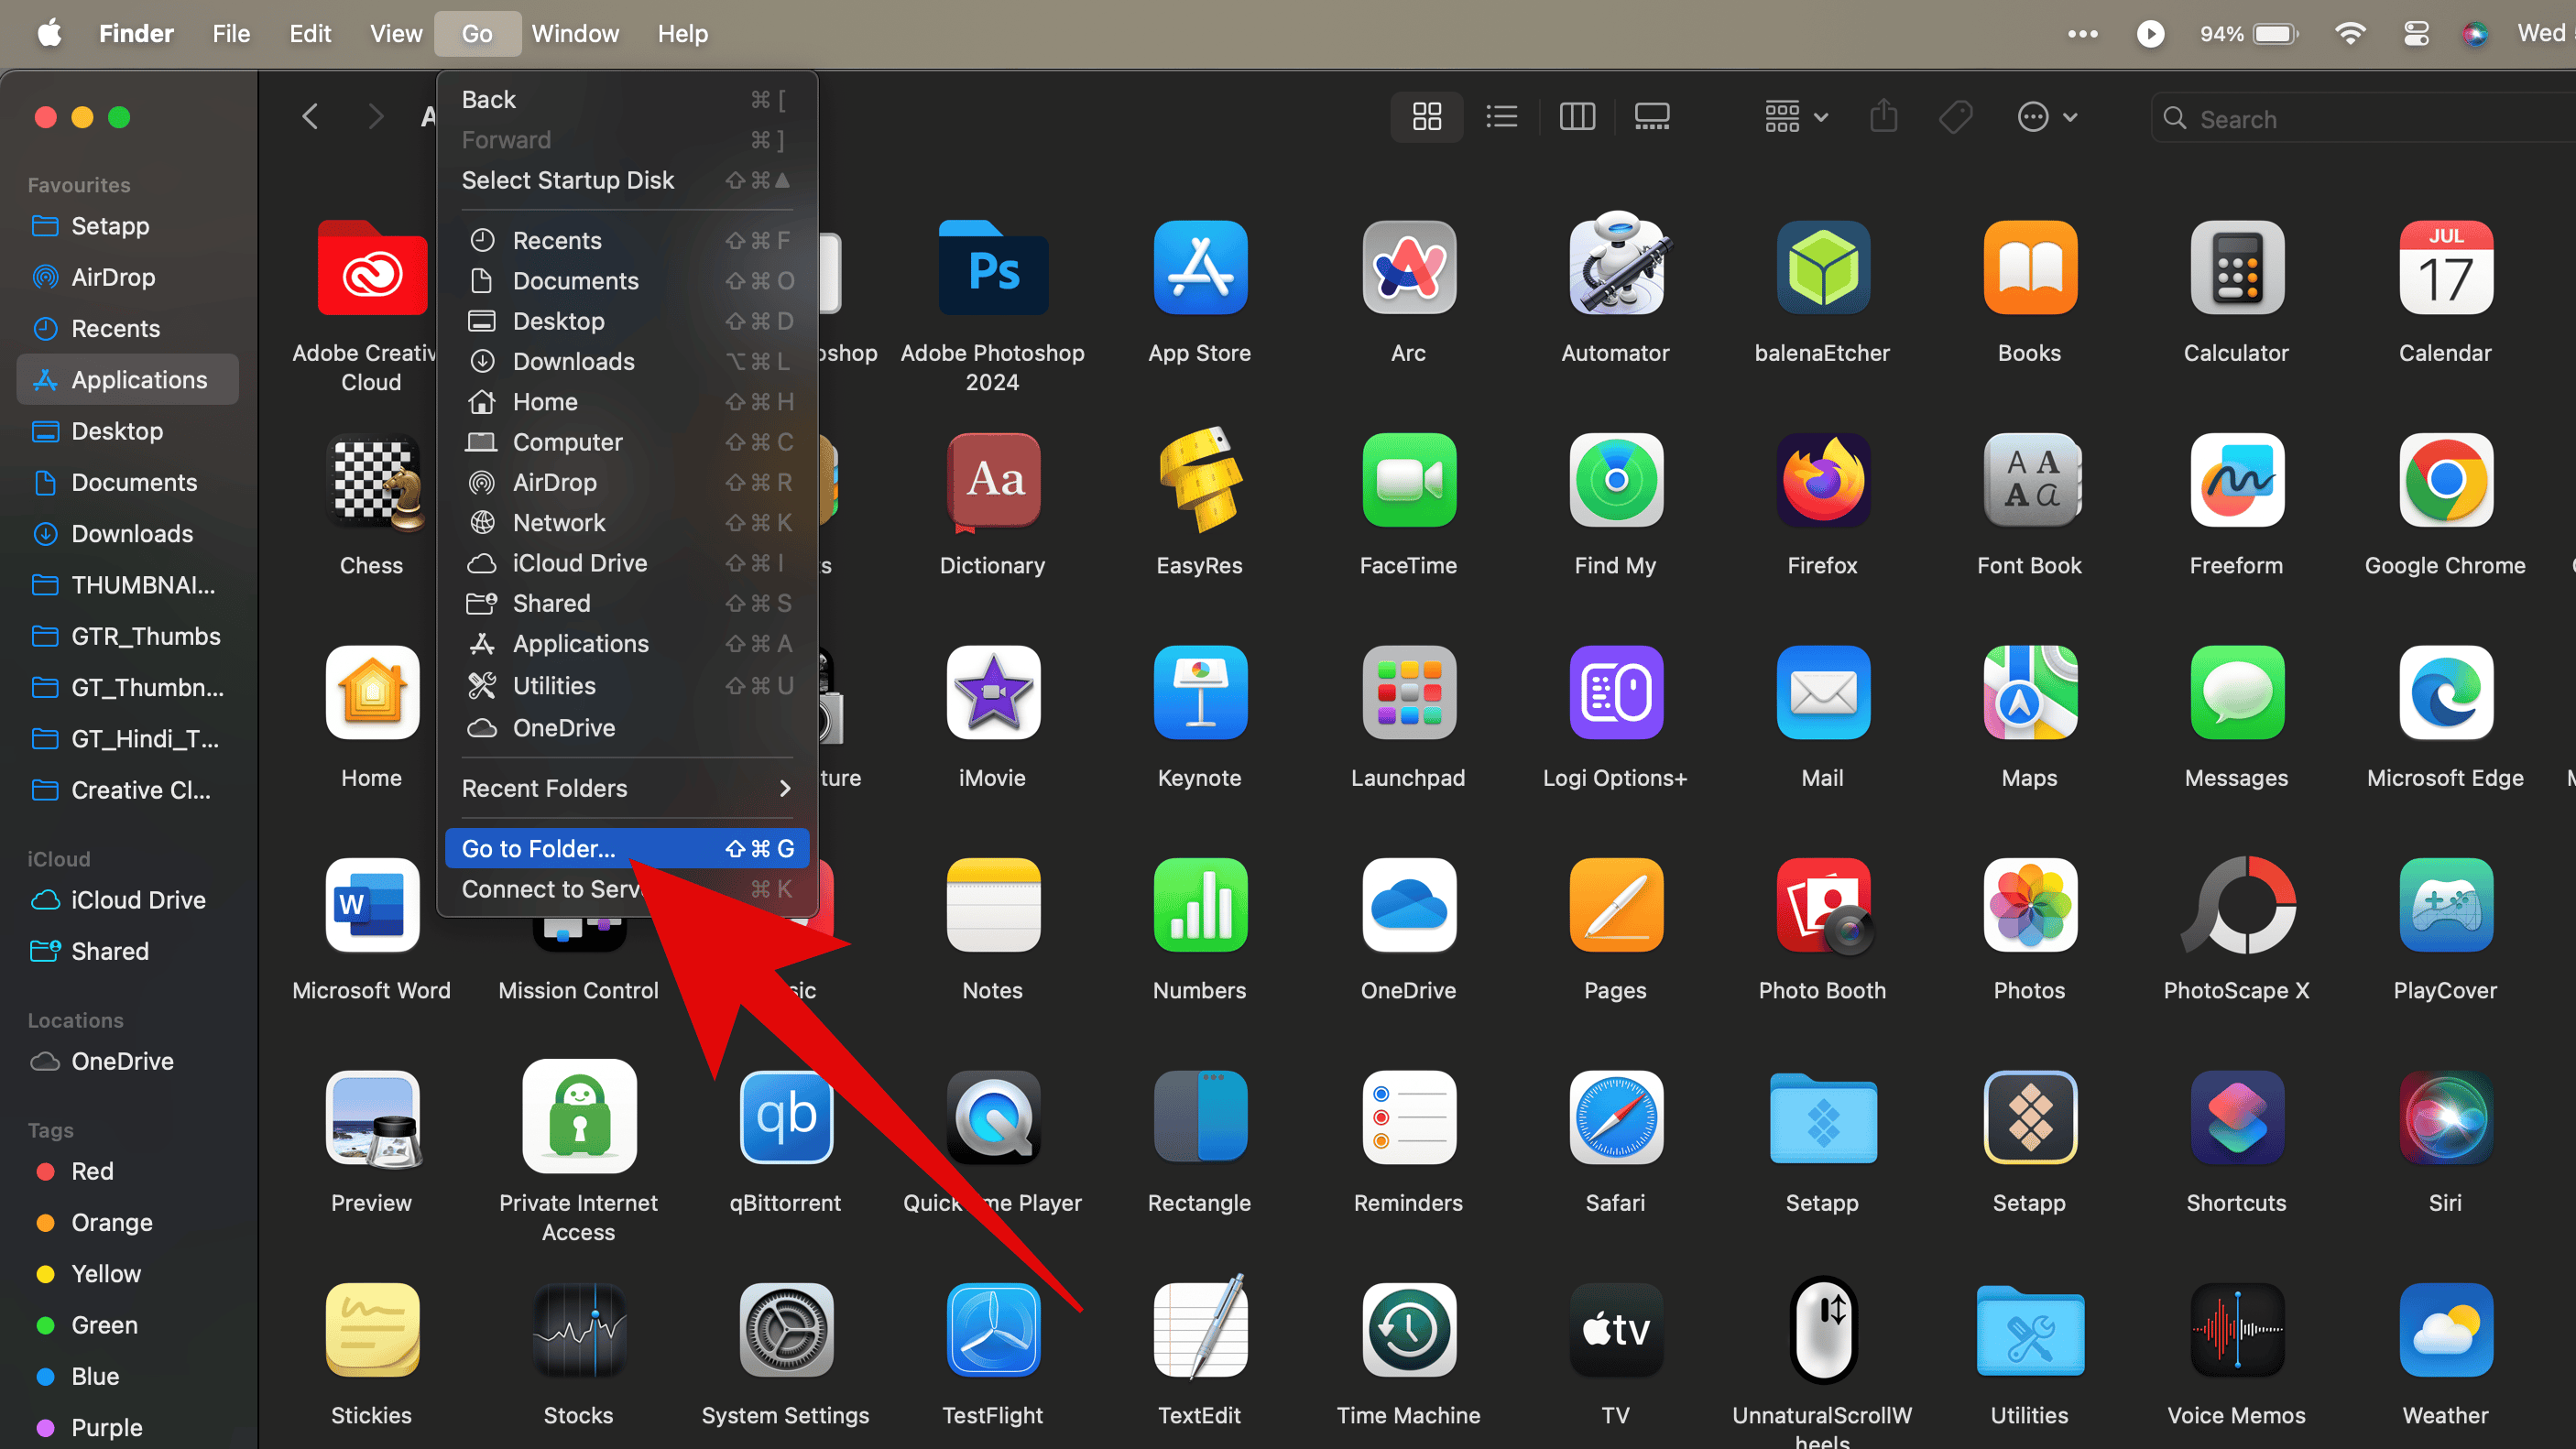 In the top menu bar, click on Go, and then select Go to Folder...